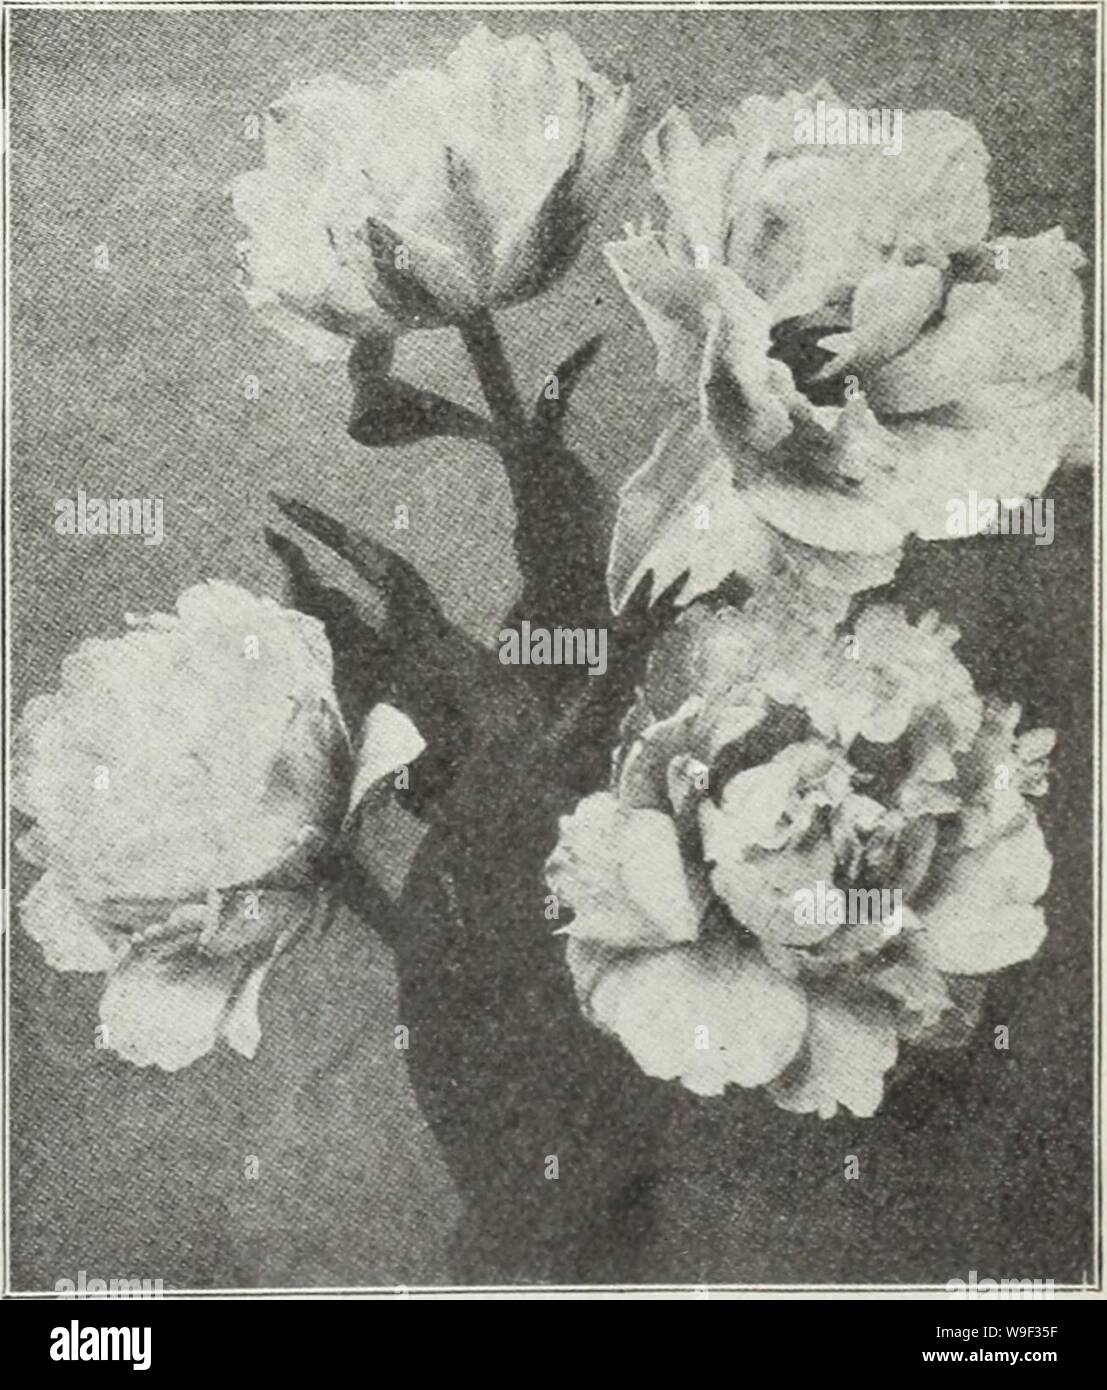 Archive image from page 12 of Currie's autumn 1929 54th year. Currie's autumn 1929 54th year bulbs and plants  curriesautumn19219curr Year: 1929 ( EARLY DOUBLE FLOWERING TULIPS Azalea—(E. 8) Beautiful deep rose flushed salmon. Doz., 1.25; 100, 8.50; 1000, 80.00. Boule de Neige—(E. 10) Large pure white. Doz., 95c; 100, 6.50; 1000, 60.00. Couronne d'Or (Crown of Gold) — (E. 10) Flower large and very double, rich golden j-cllow shaded orange. Doz., 1.20; 100, .00; 1000, 75.00. Electra—(E. 8) Carmine shaded light violet; very large and beautiful. Doz., 1.70; 100, 12.50. Gloria Solis—(E. 9) Very la Stock Photo